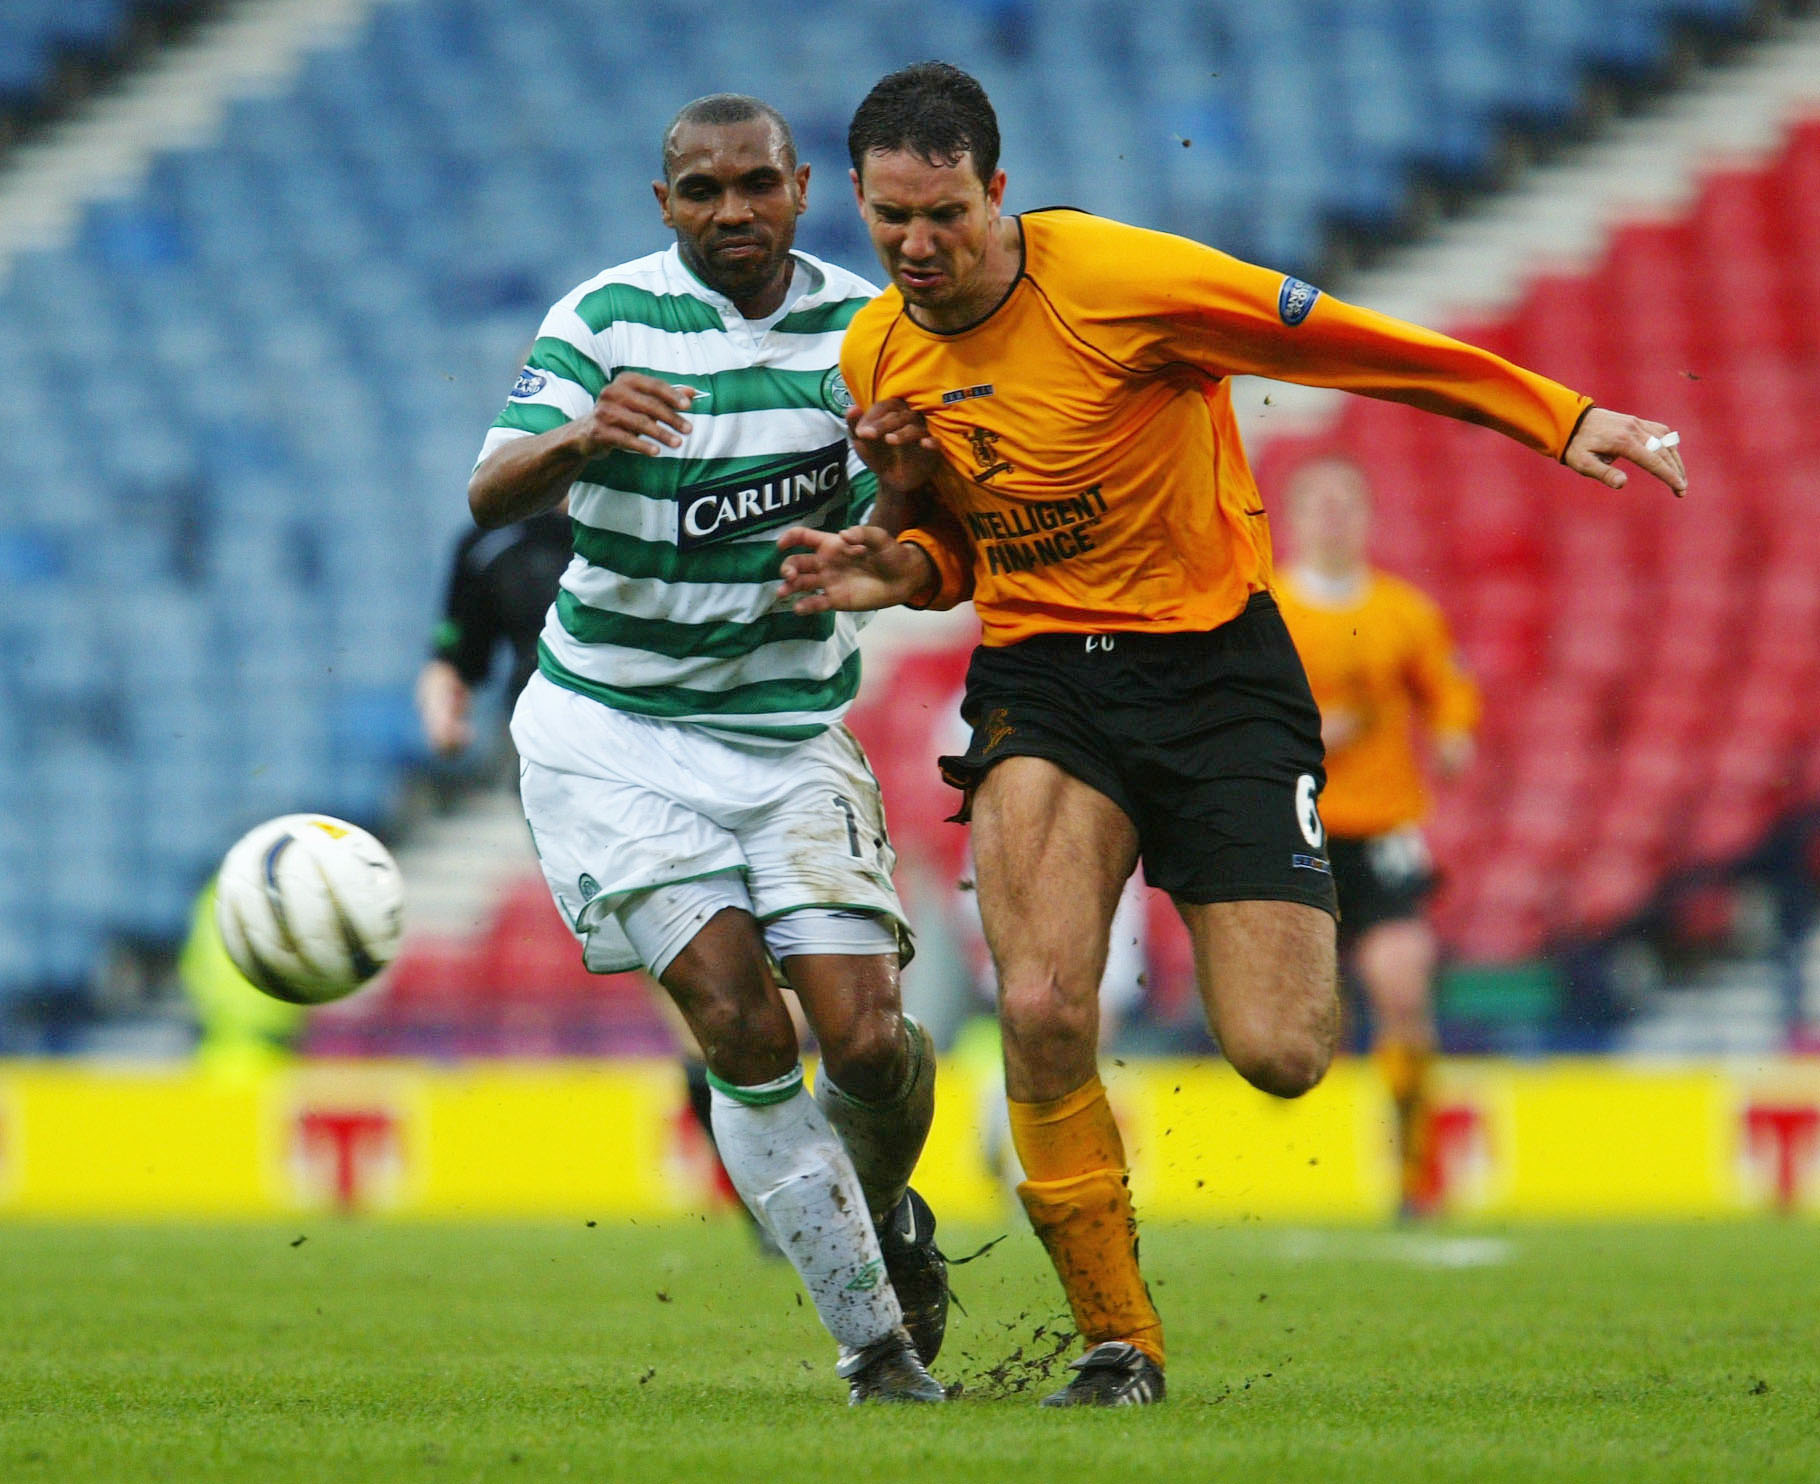 Didier Agathe, who recently left his job at Durham City 